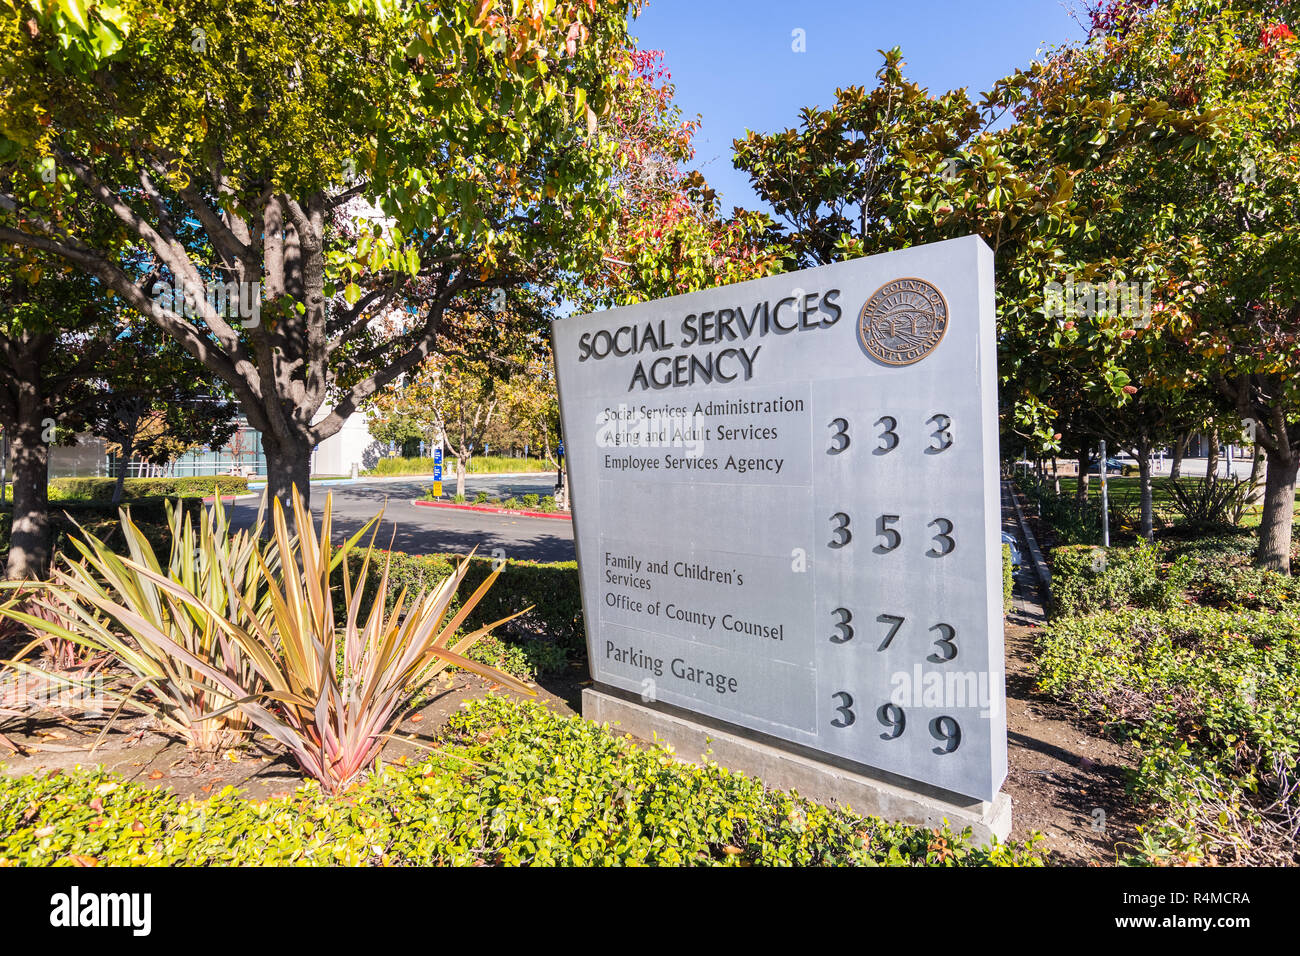 November 25, 2018 San Jose / CA / USA - Social Services Agency for Santa Clara county sign located in front of their offices close to downtown San Jos Stock Photo